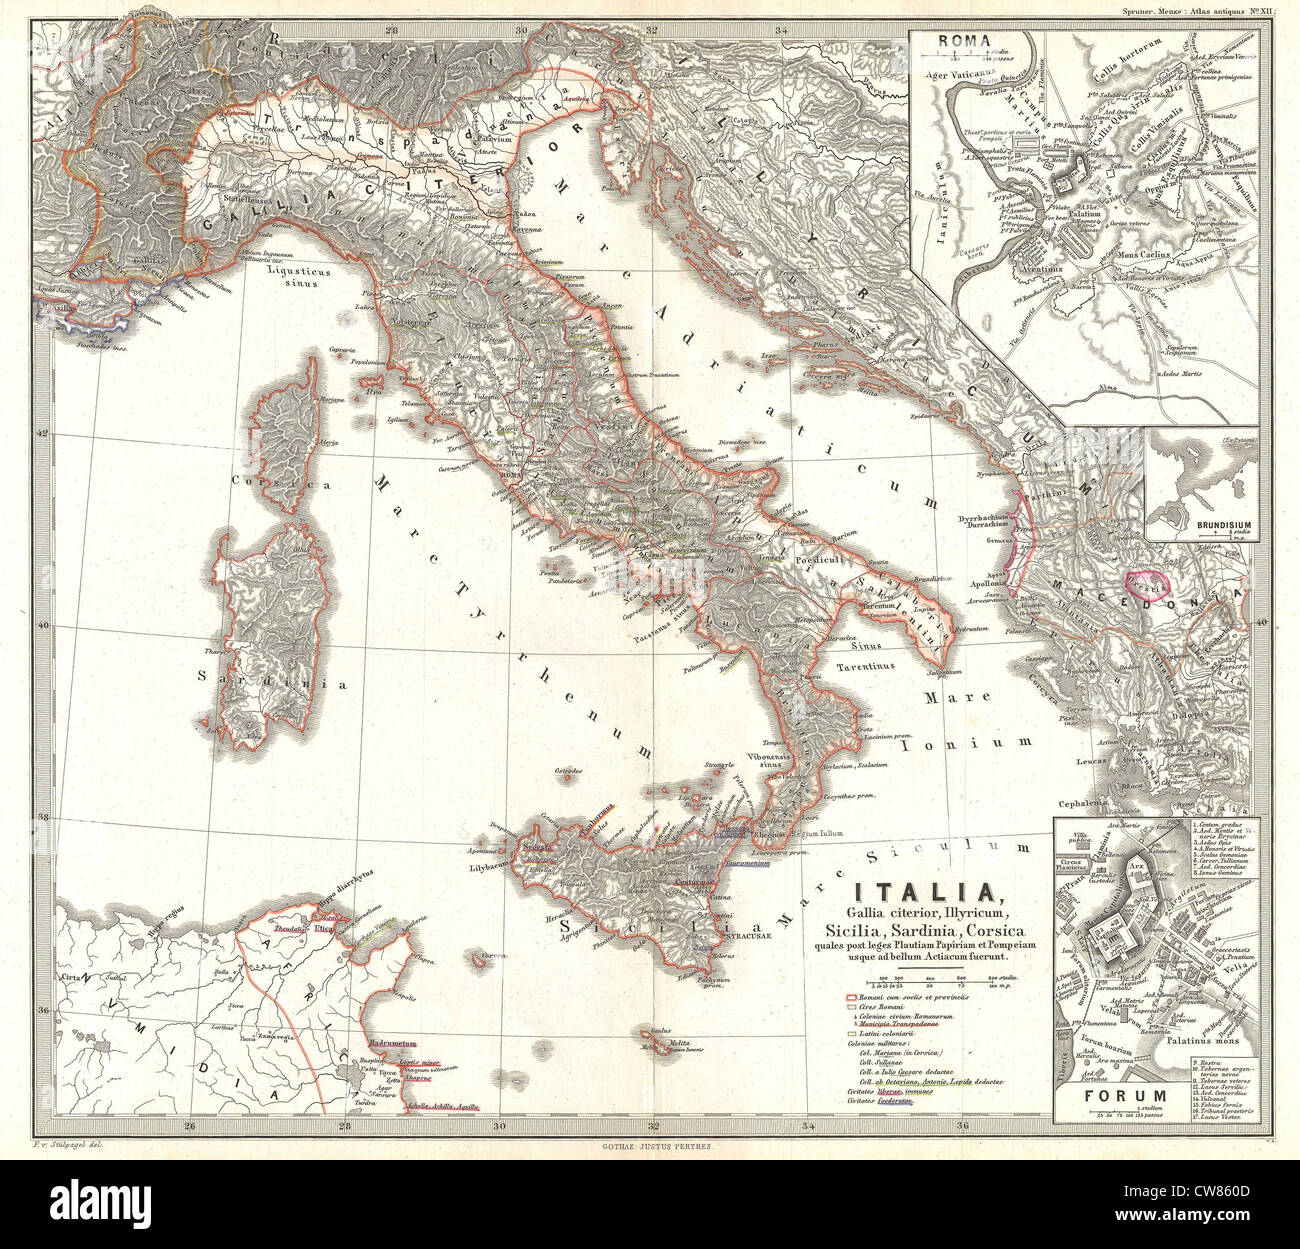 1865 Spruner Map of Italy after the Battle of Actium Stock Photo